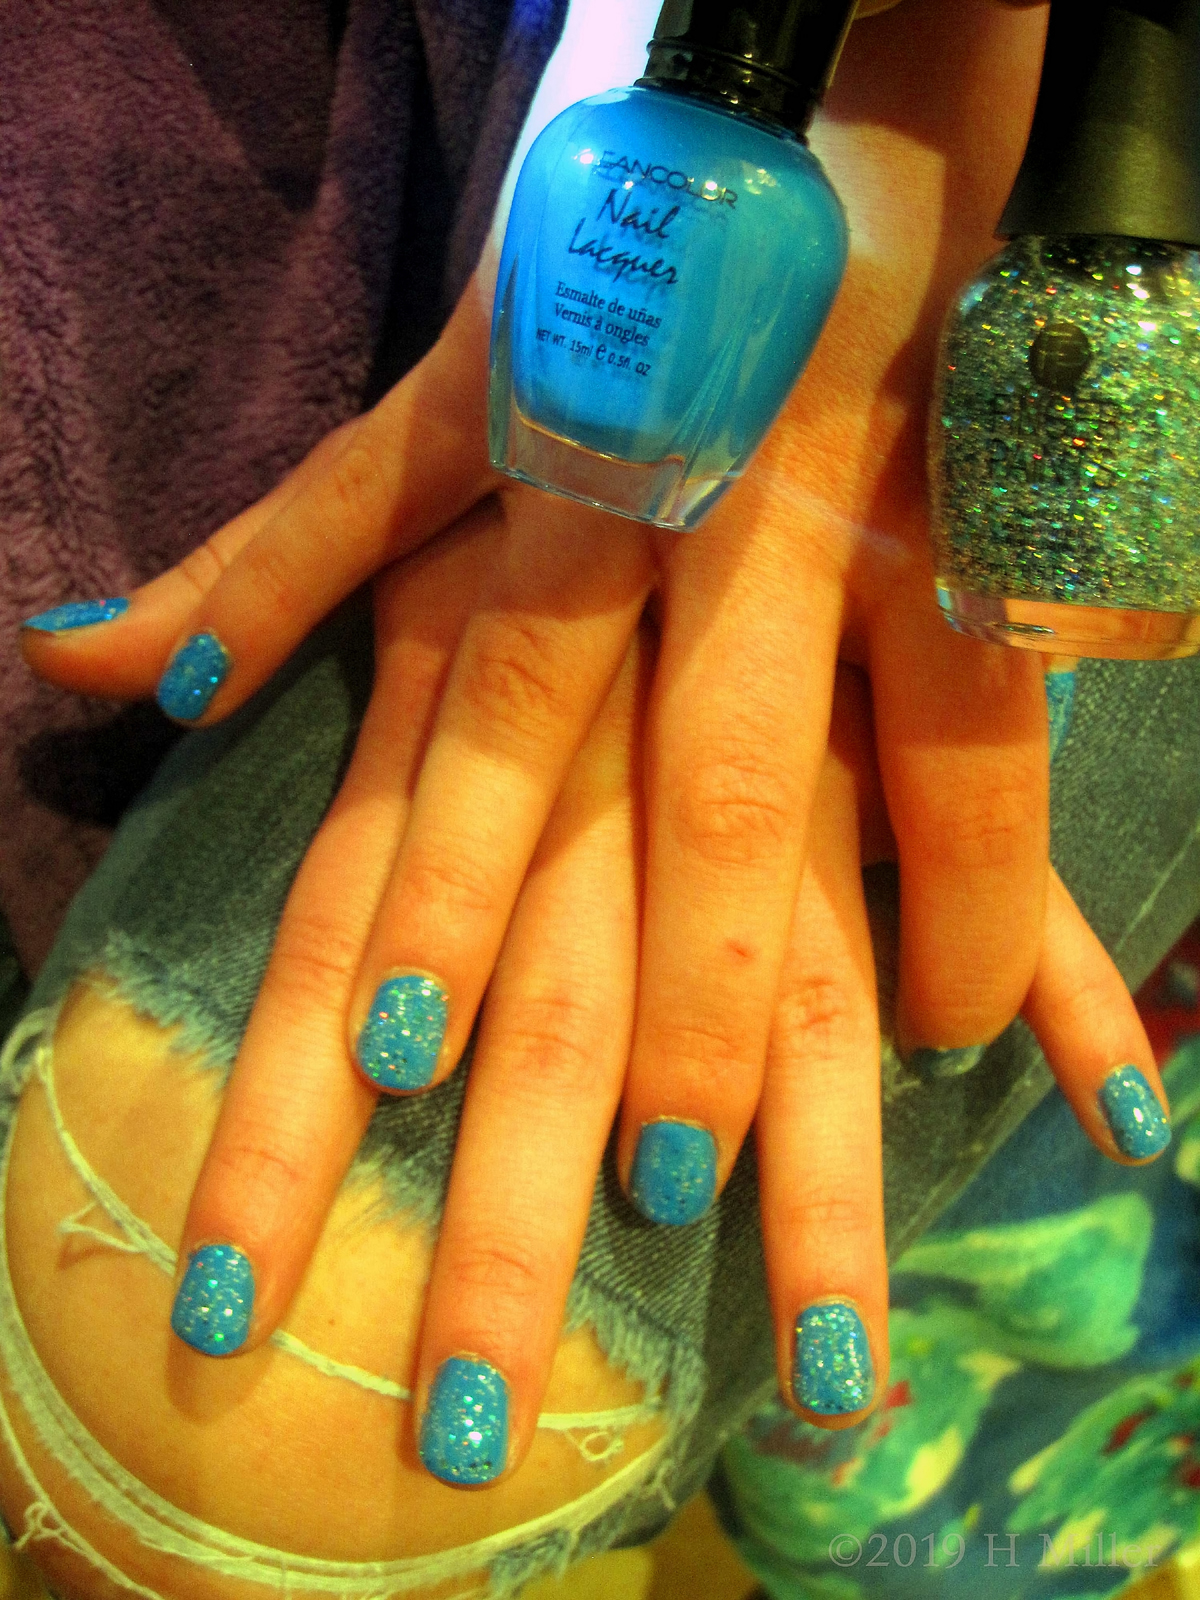 How This Beautiful Mini Mani Came To Be! Bright Blue Polish WIth Light Green Glitter!